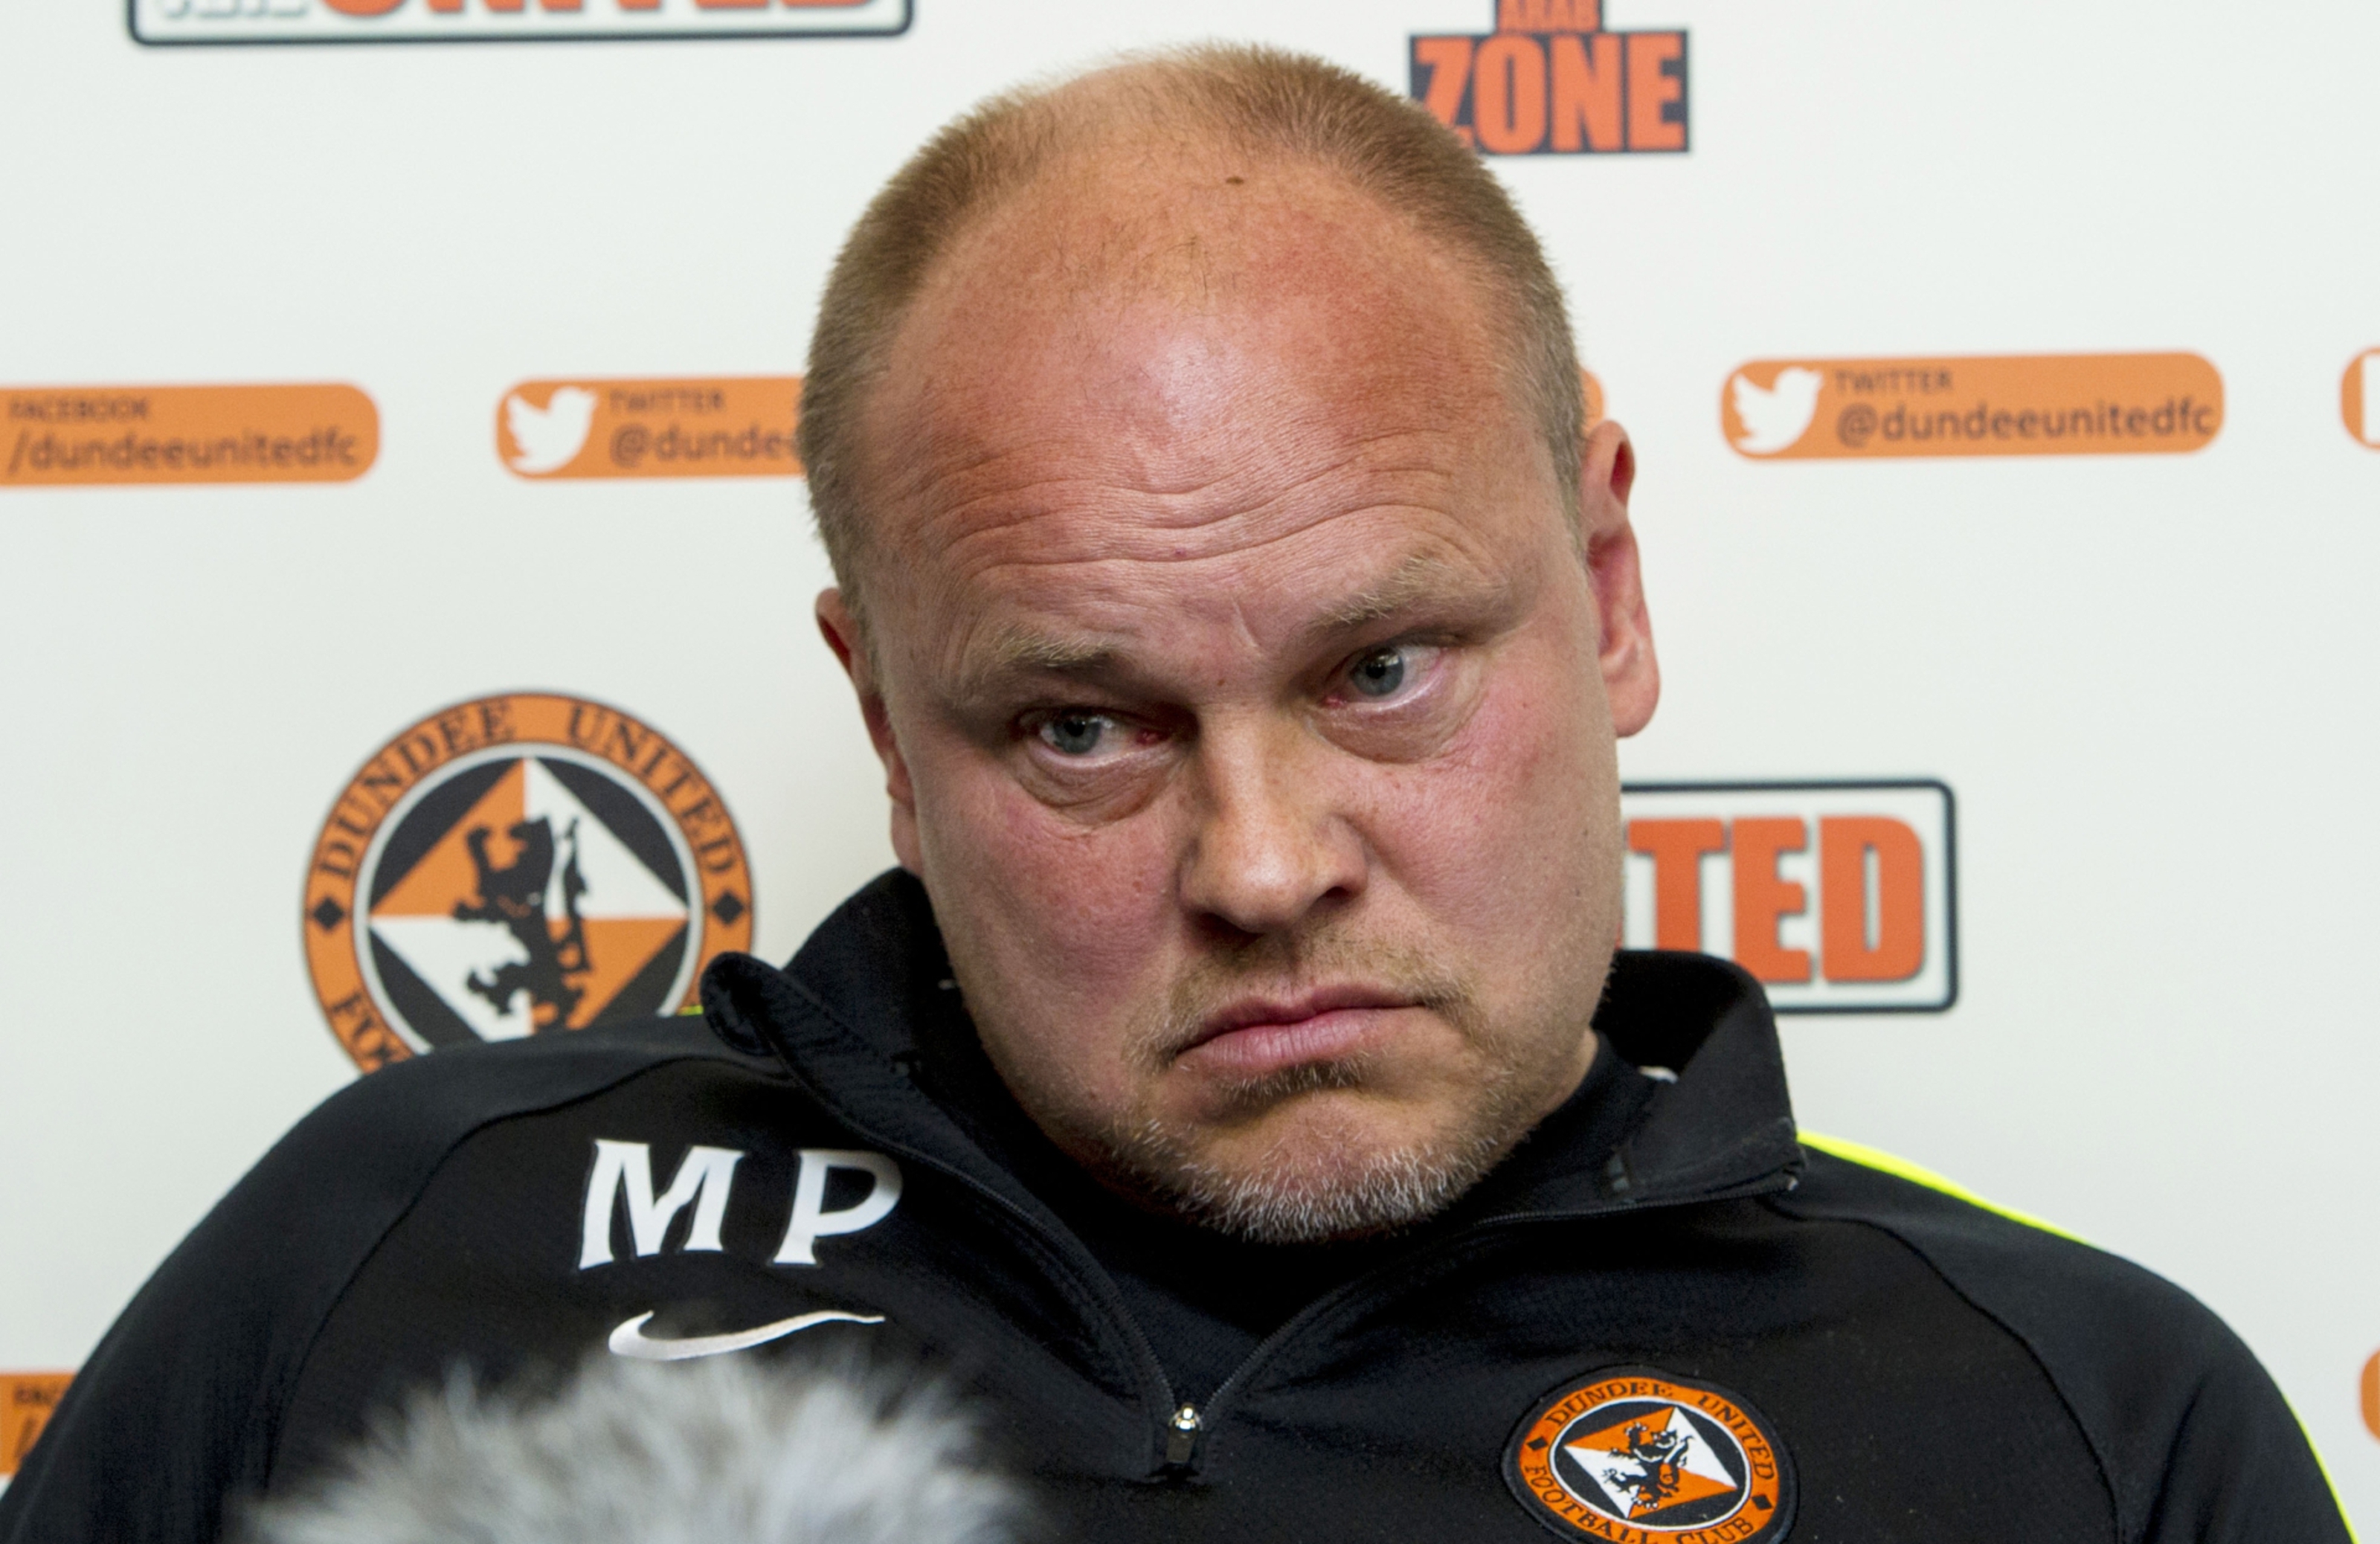 Mixu Paatelainen addresses the media at St Andrews.